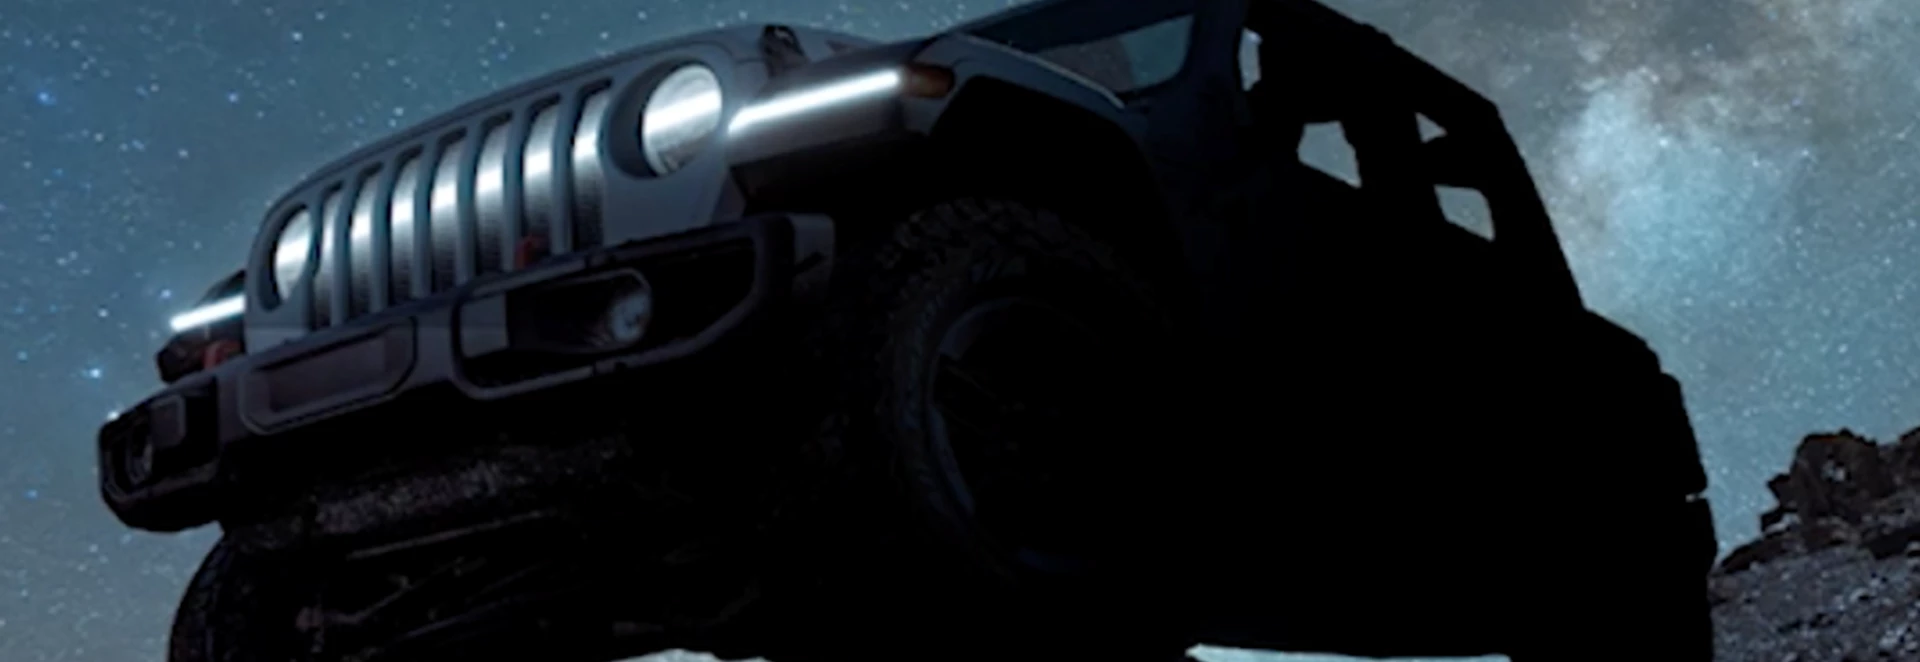 Jeep set to unveil new electric Wrangler 